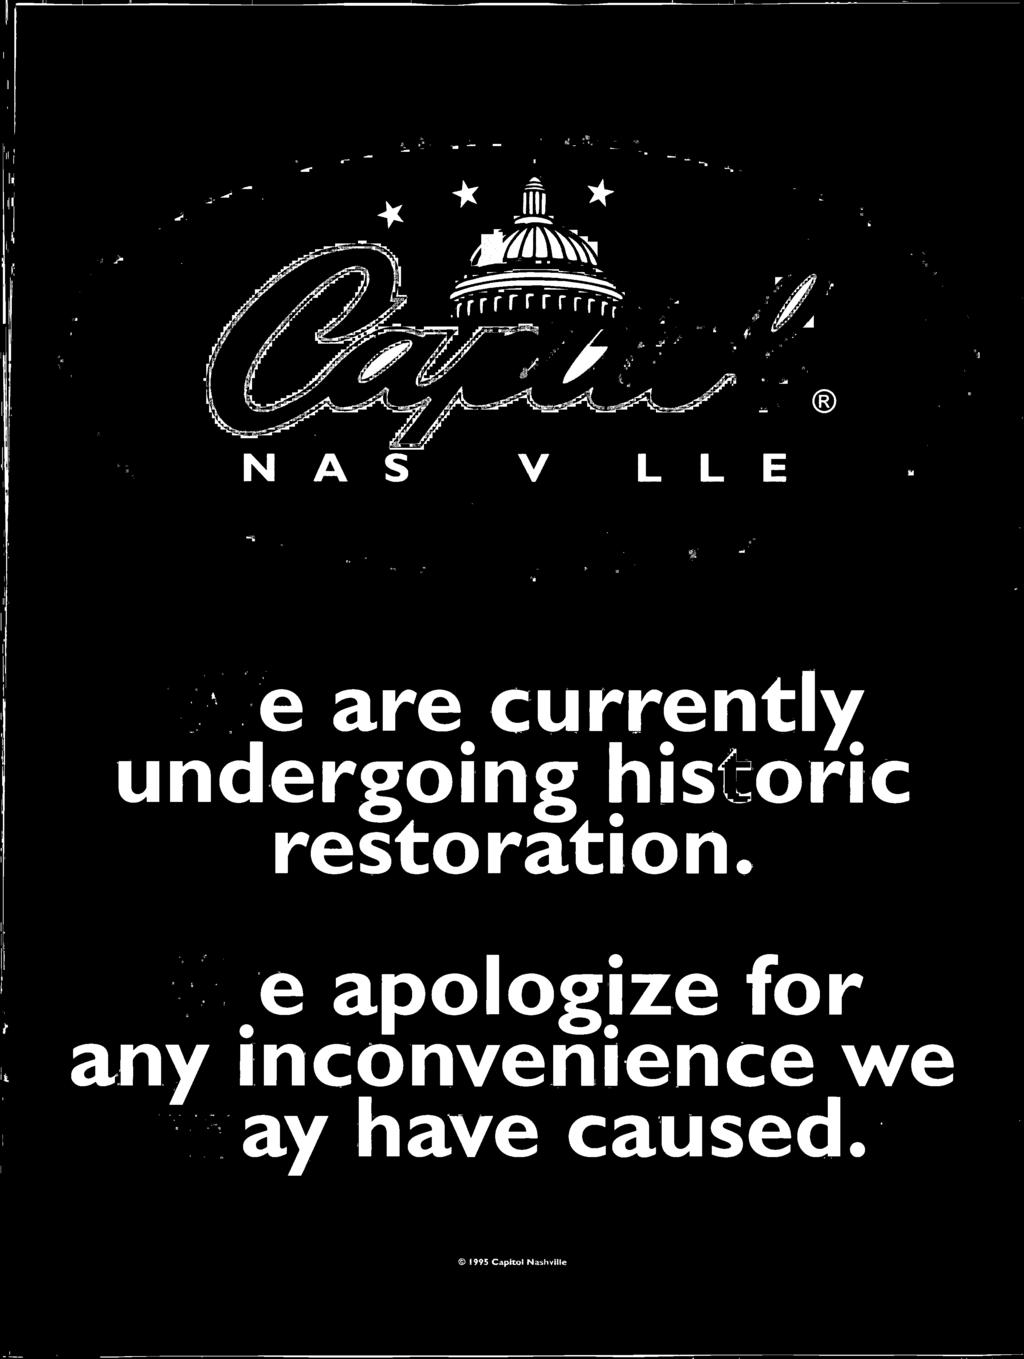 We apologize for